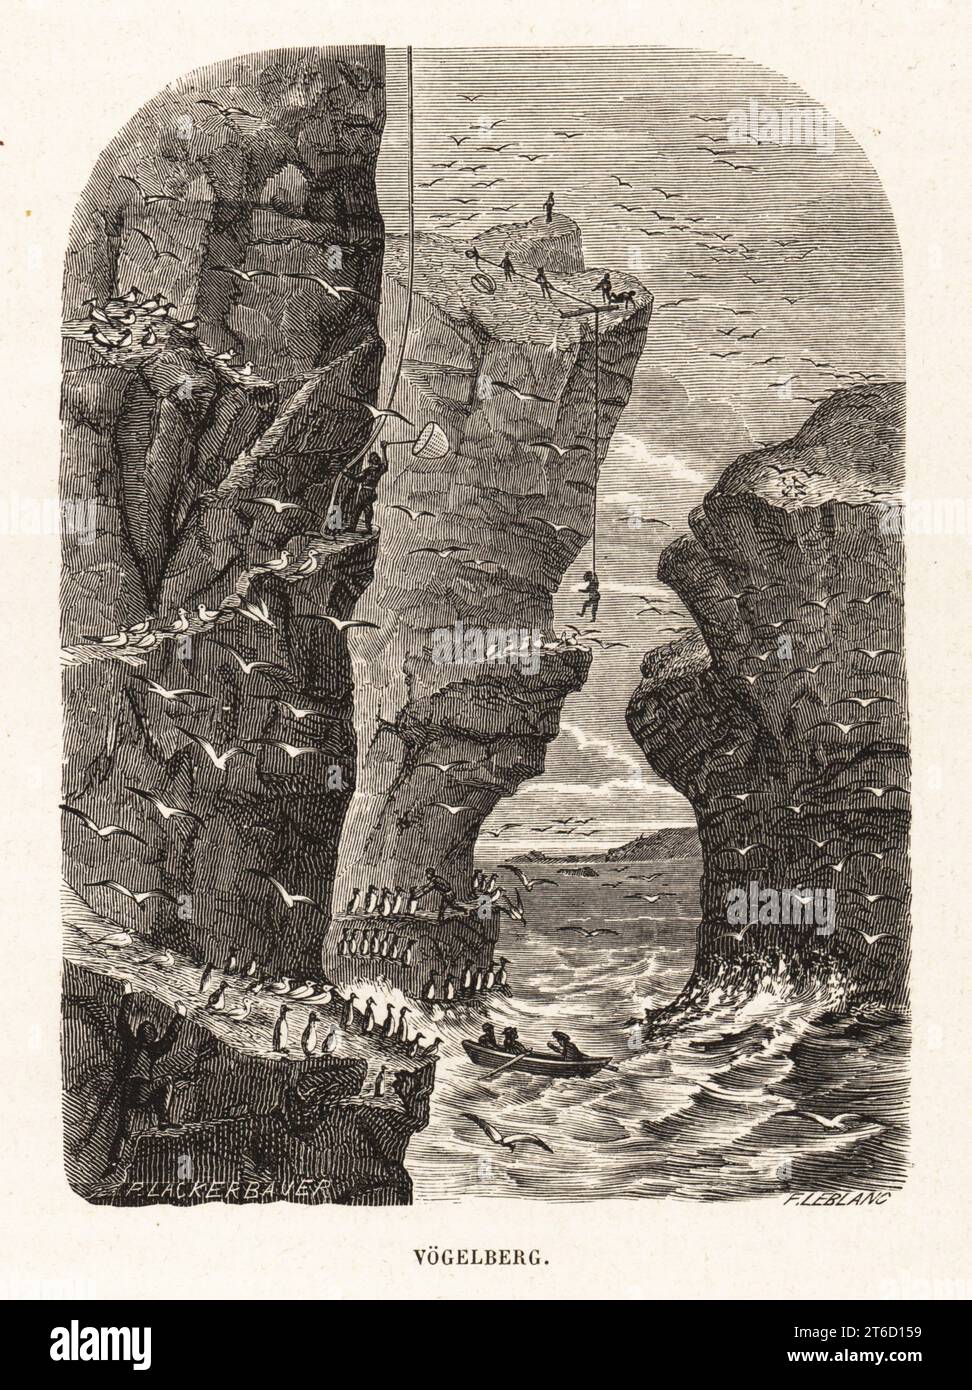 Hunters on St Kilda climbing cliffs to harvest eggs of marine birds such as the Northern fulmar, Fulmarus glacialis, and puffin, Fratercula arctica. Vogelberg. Woodcut by F. Leblanc after Pierre Lackerbauer from Alfred Fredols Le Monde de la Mer, the World of the Sea, edited by Olivier Fredol, Librairie Hachette et. Cie., Paris, 1881. Alfred Fredol was the pseudonym of French zoologist and botanist Alfred Moquin-Tandon, 1804-1863. Stock Photo